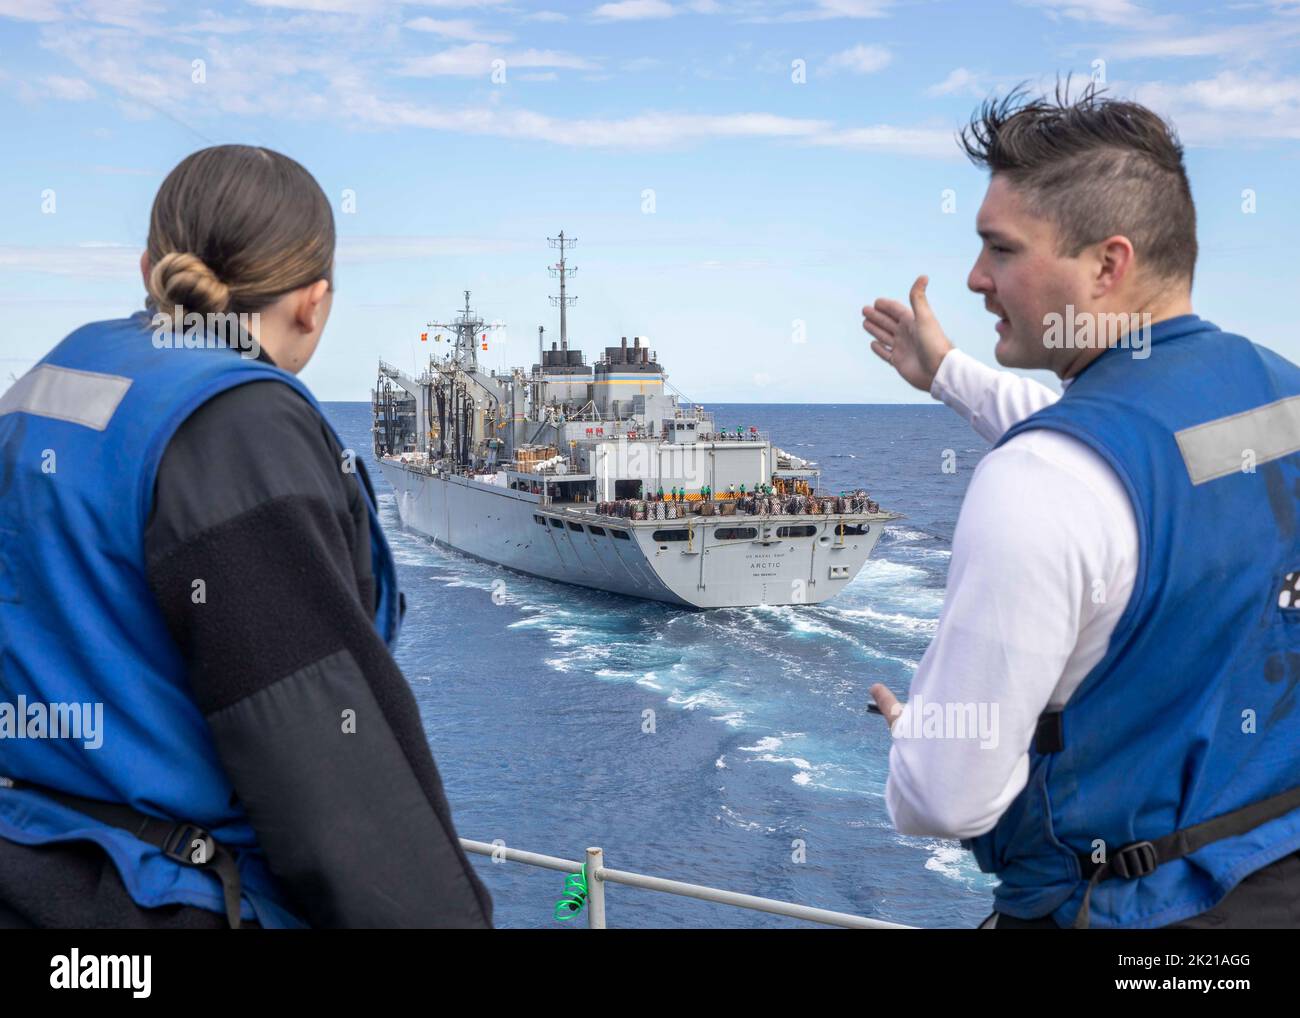 220920-N-ZG822-1050 ADRIATIC SEA (Sept. 20 2022) Quartermaster 3rd Class Jacob Renfrow, right, and Quartermaster Seaman Alexis Mitchell, both assigned to the Nimitz-class aircraft carrier USS George H.W. Bush (CVN 77), discuss the distance during the approach to the supply-class fast combat support ship USNS Arctic (T-AOE 8) for a replenishment-at-sea, Sept. 20, 2022. The George H.W. Bush Carrier Strike Group is on a scheduled deployment in the U.S. Naval Forces Europe area of operations, employed by U.S. Sixth Fleet to defend U.S., allied and partner interests. (U.S. Navy photo by Mass Commun Stock Photo